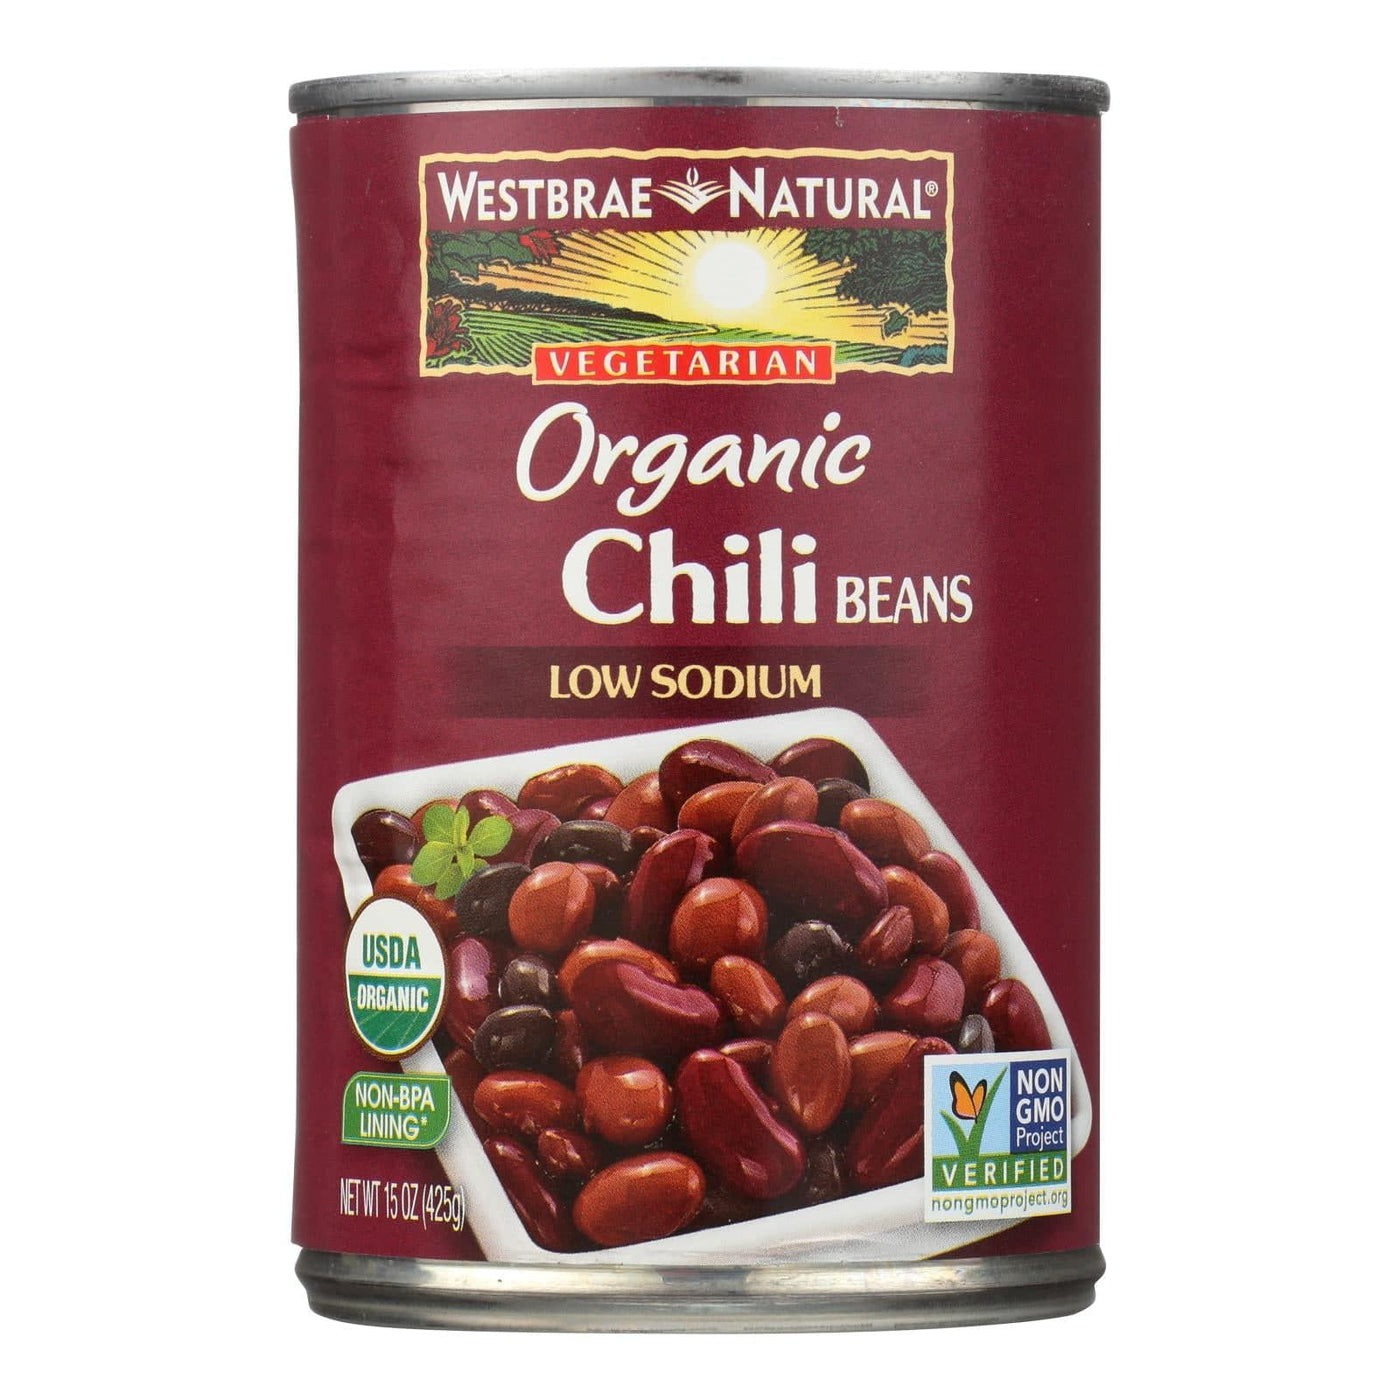 Buy Westbrae Foods Organic Chili Beans - Case Of 12 - 15 Oz.  at OnlyNaturals.us